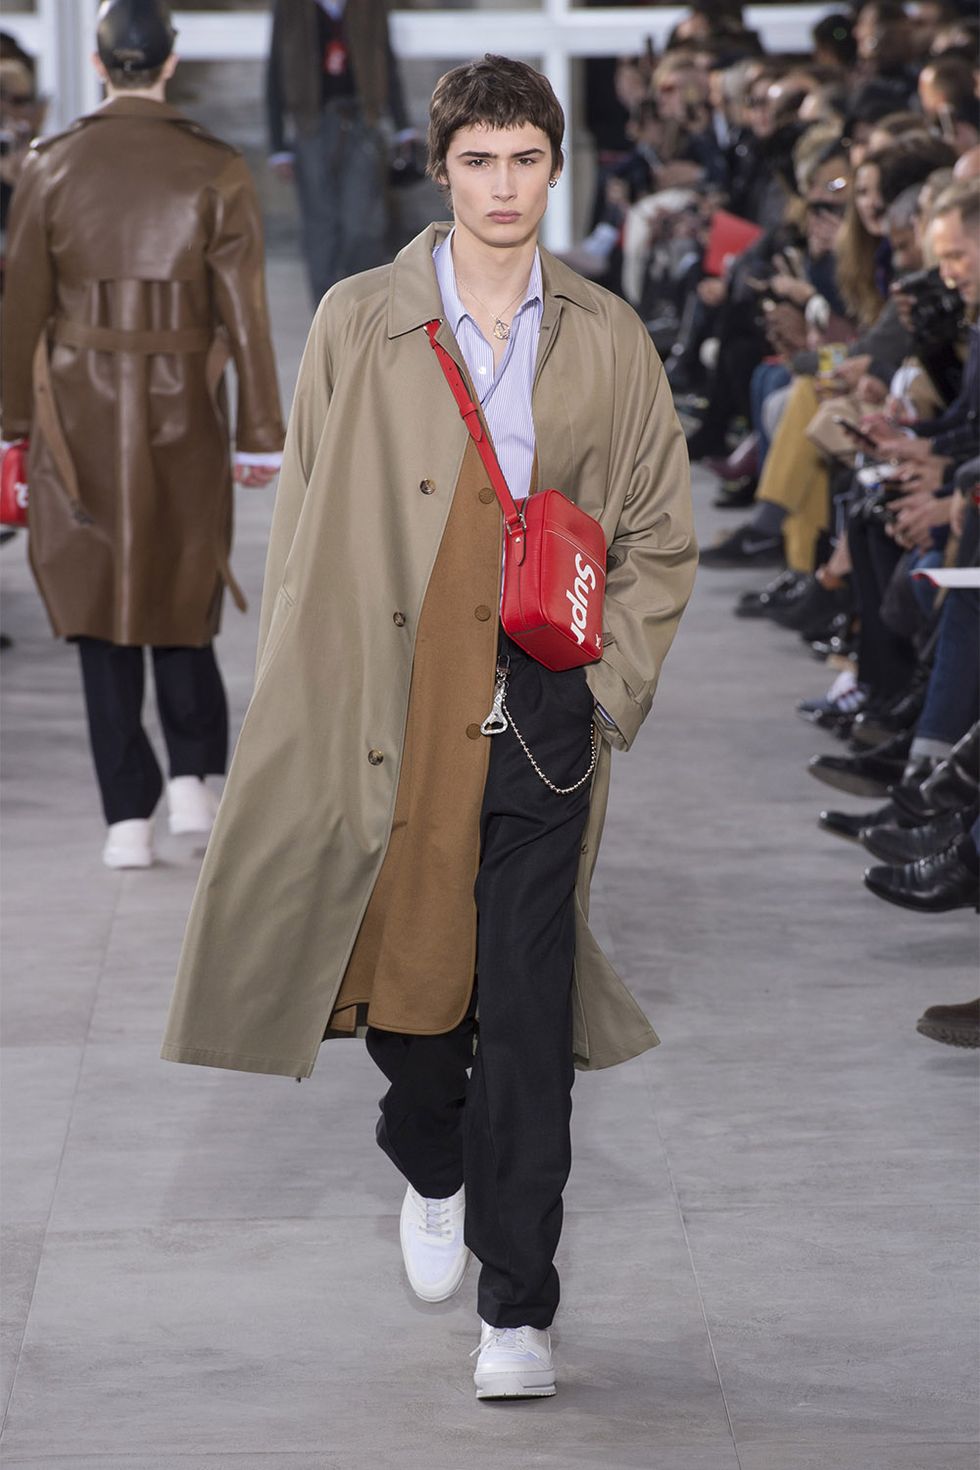 Louis Vuitton and Supreme: a collaboration made in heaven at Paris